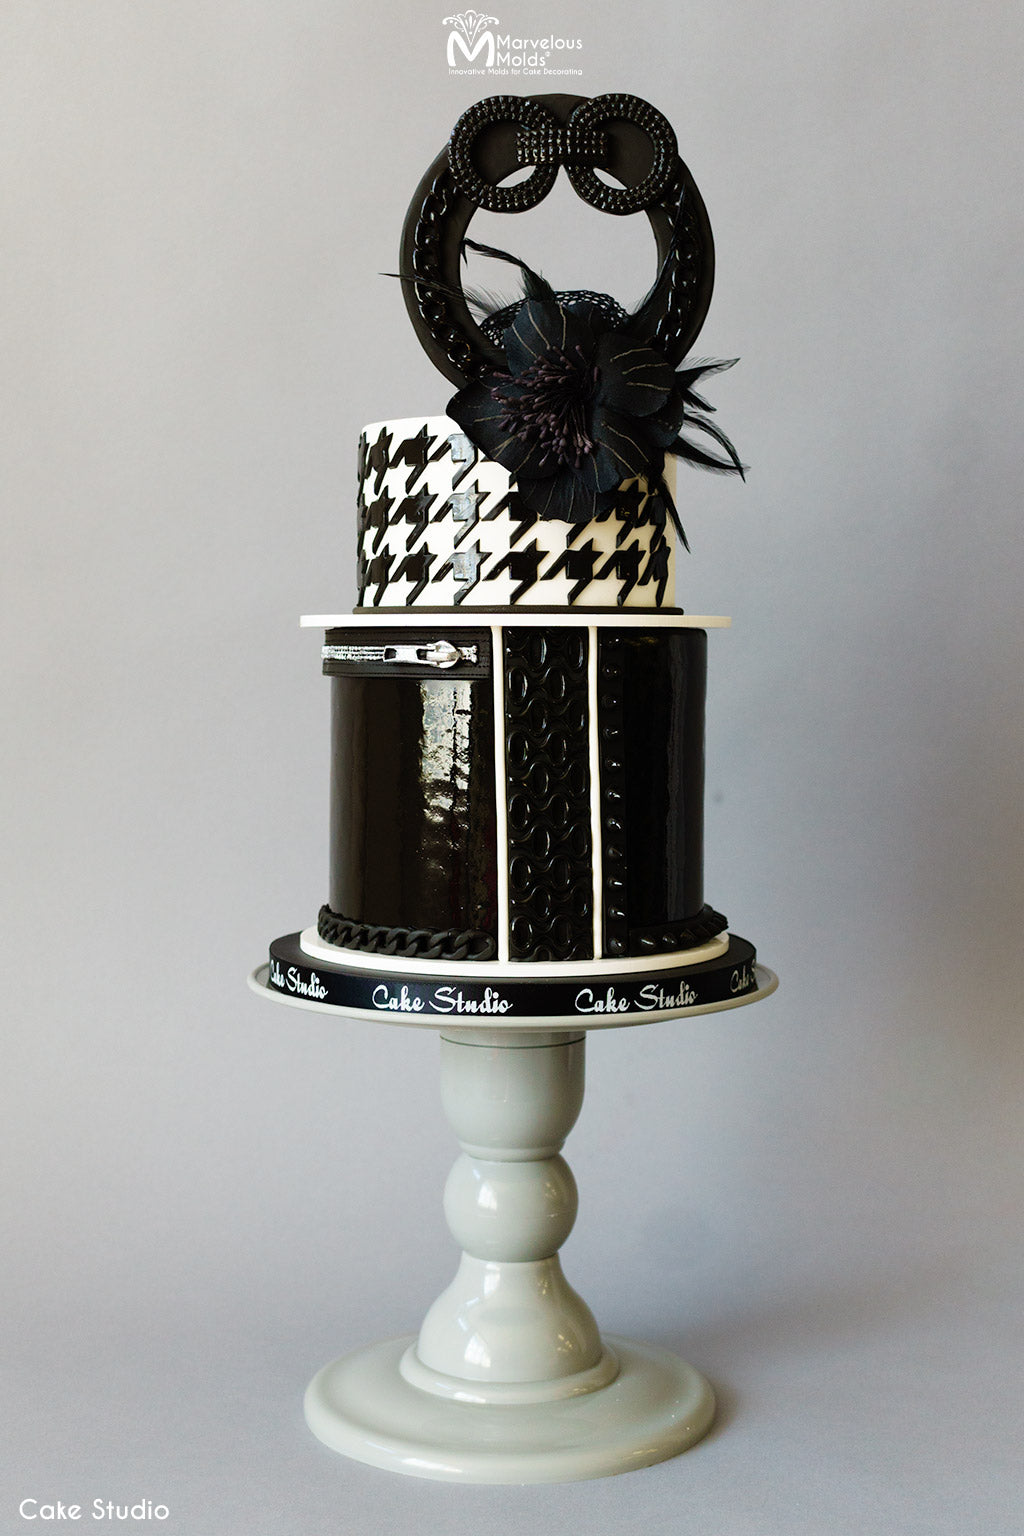 Houndstooth Black and White Wedding Cake Decorated Using the Marvelous Molds Large Chain PinchPro Silicone Mold for Cake Decorating